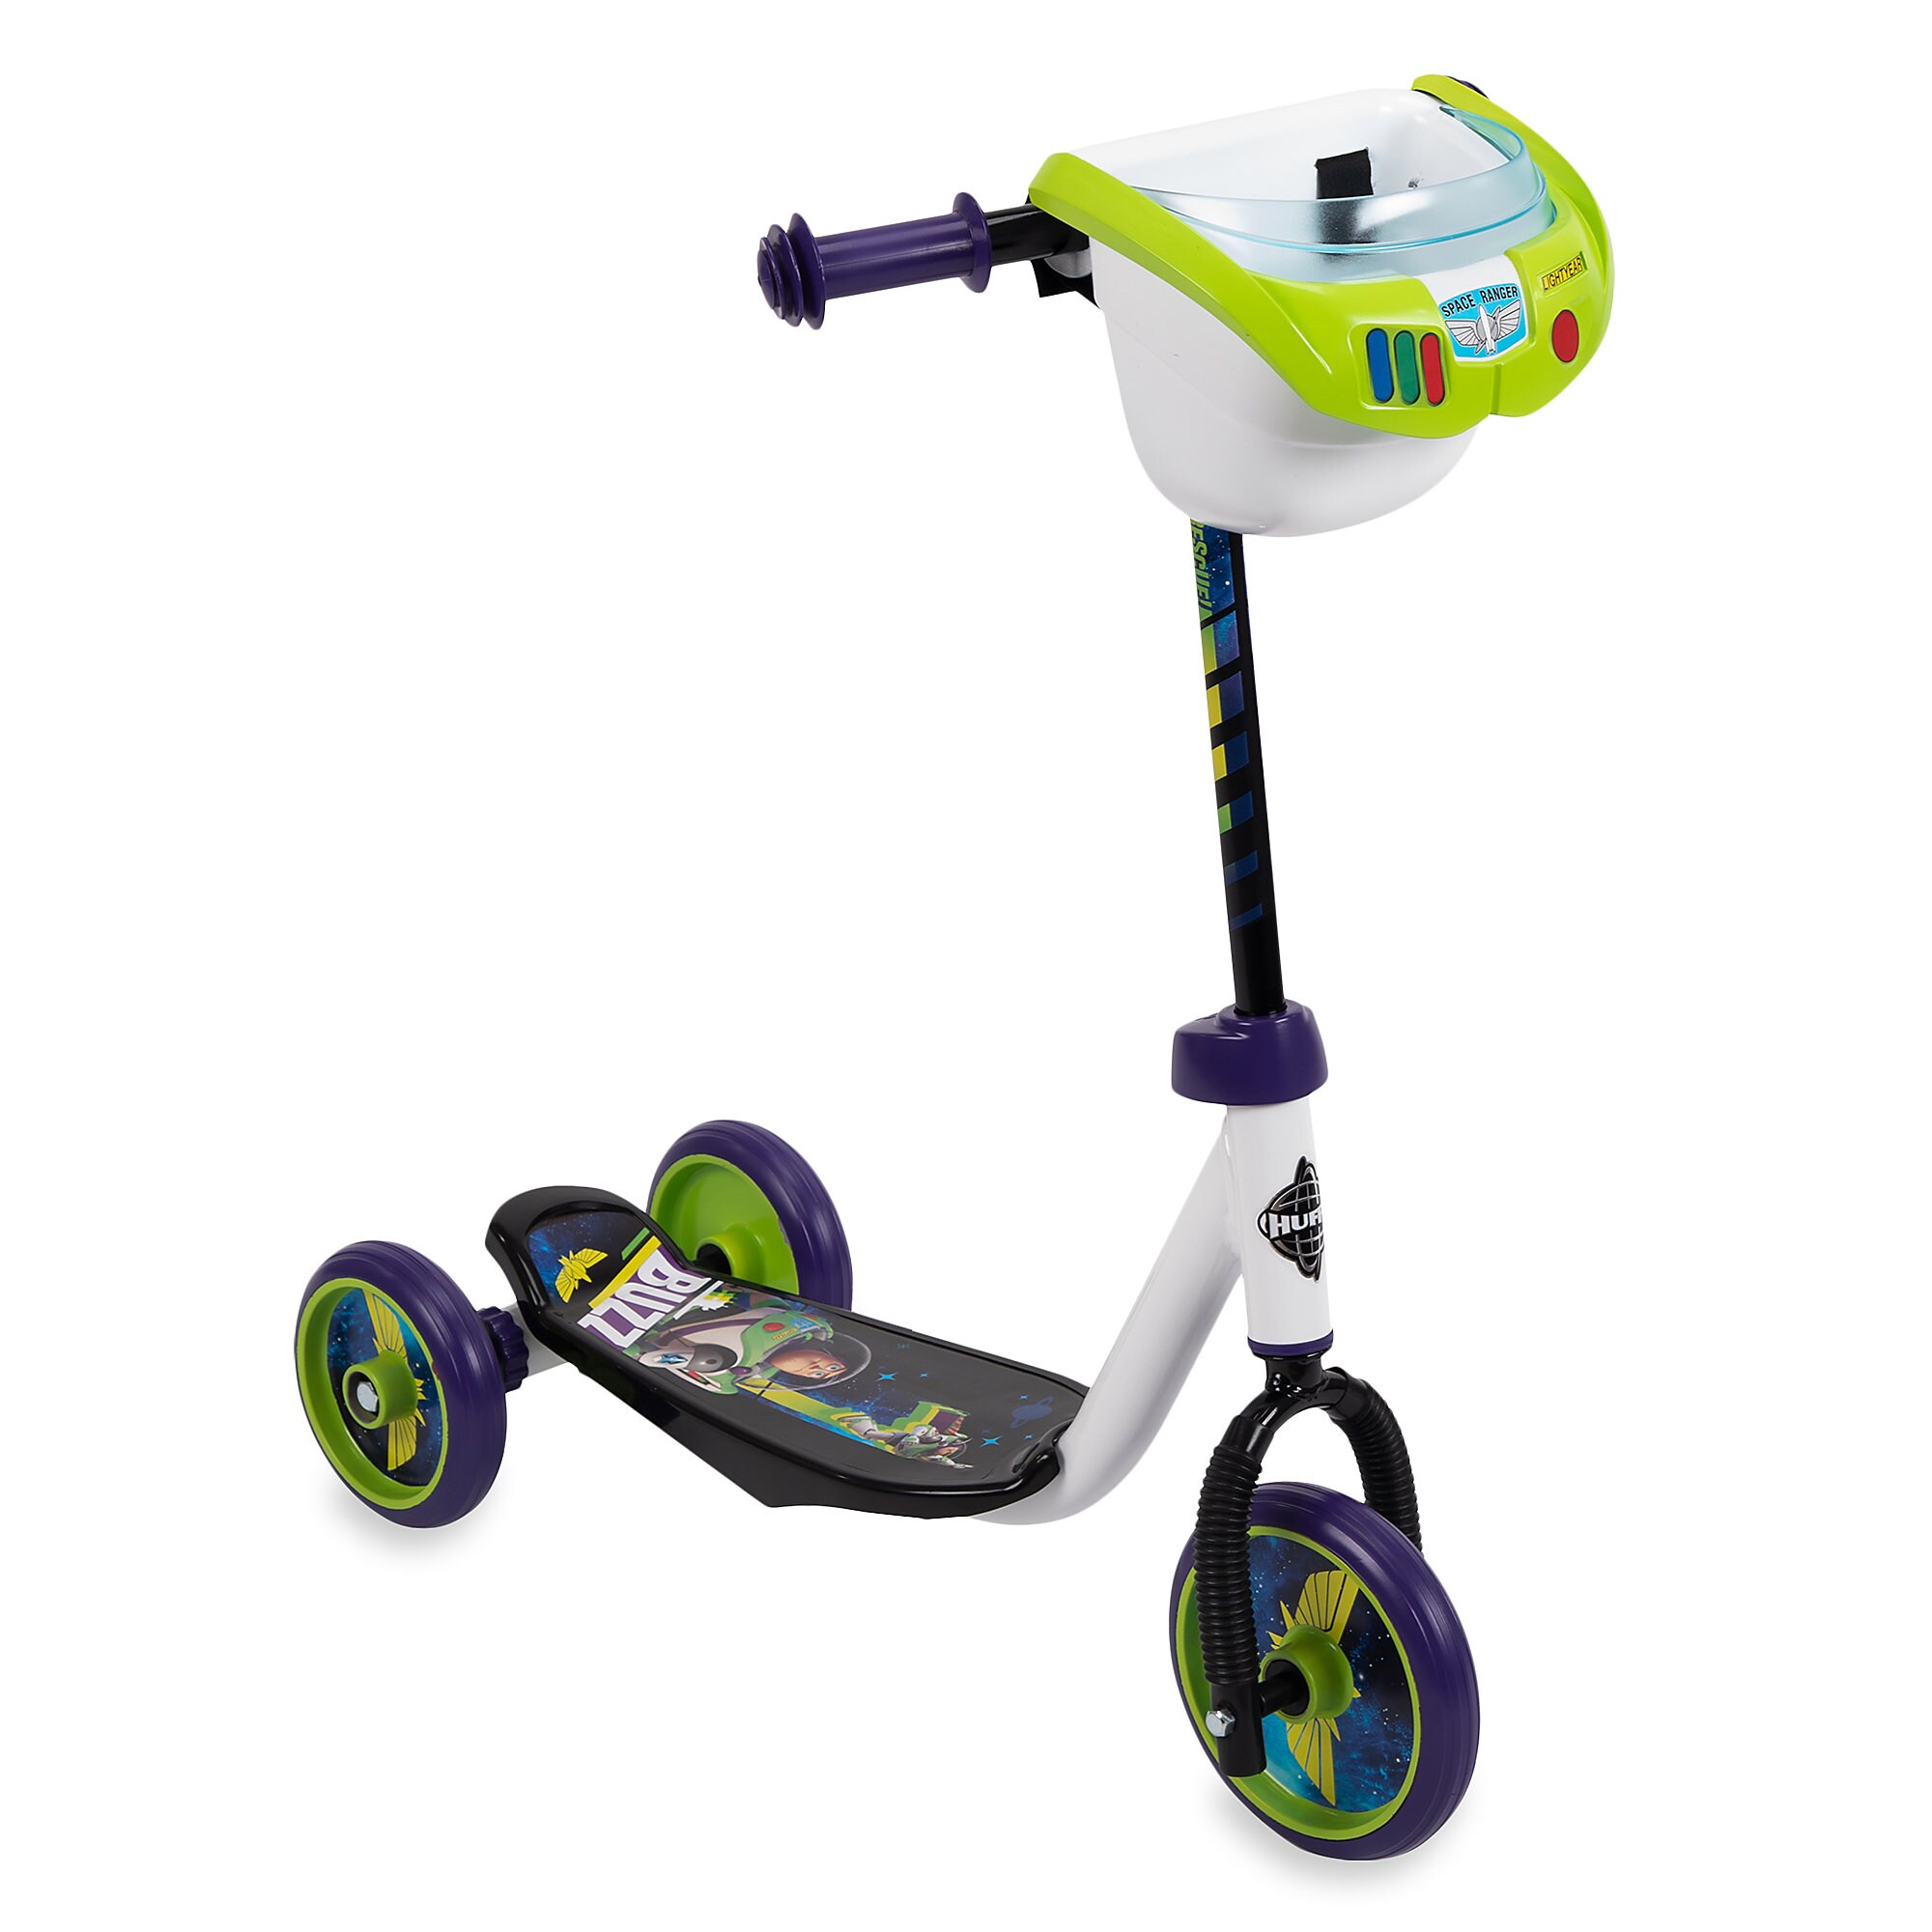 Buzz Lightyear Scooter by Huffy